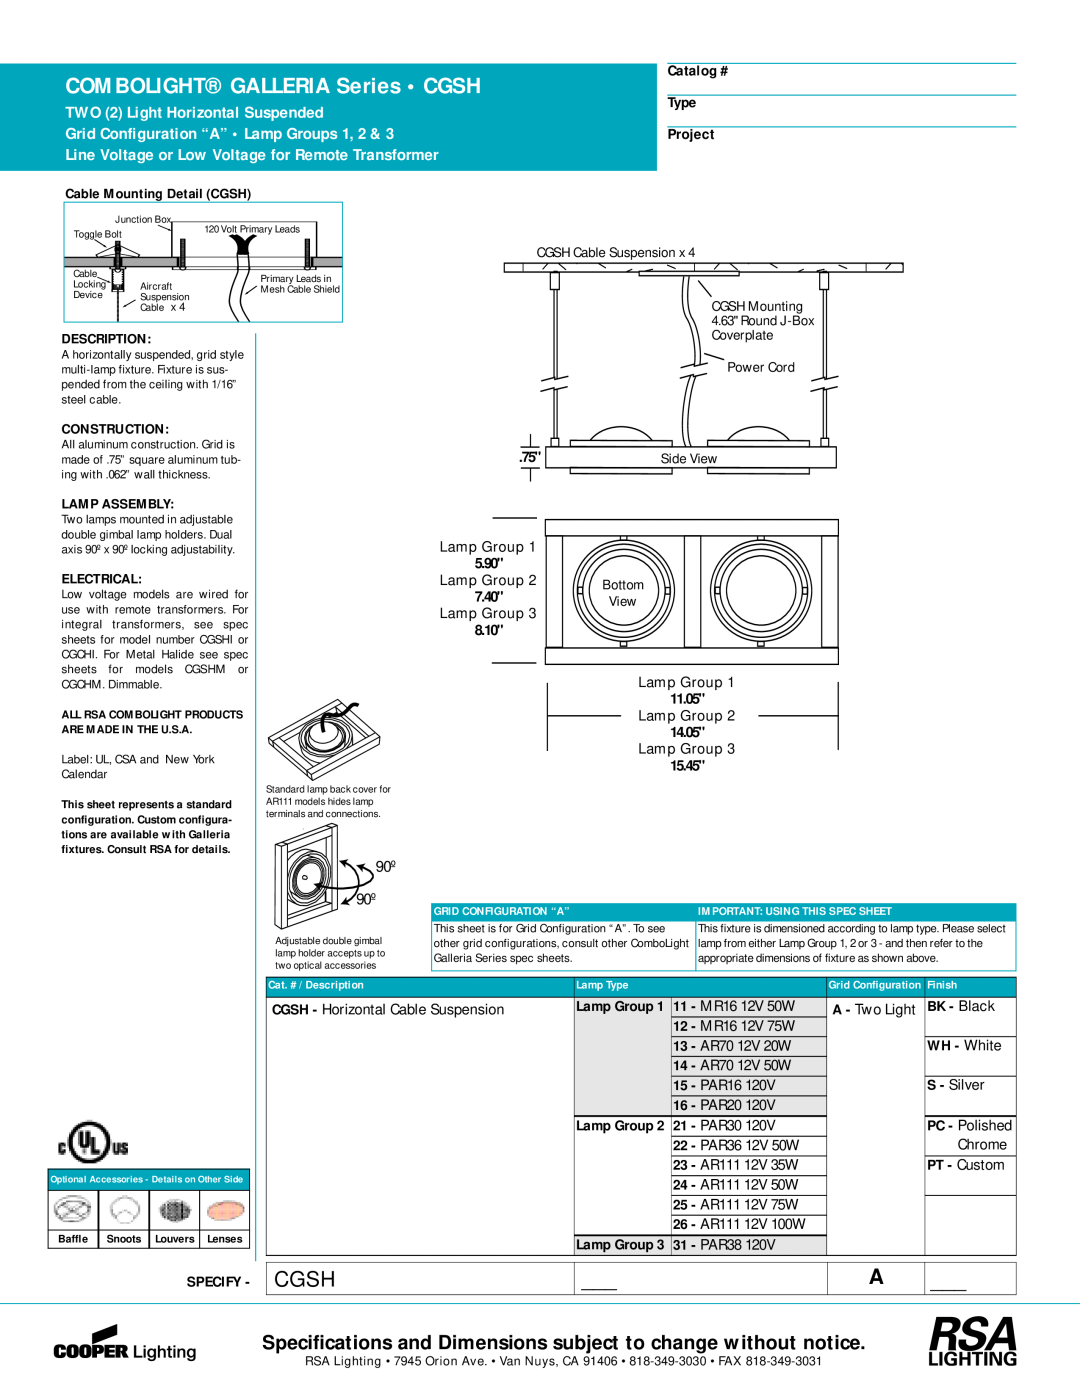 Cooper Lighting specifications COMBOLIGHT GALLERIA Series CGSH, Cgsh, TWO 2 Light Horizontal Suspended, Catalog #, Type 